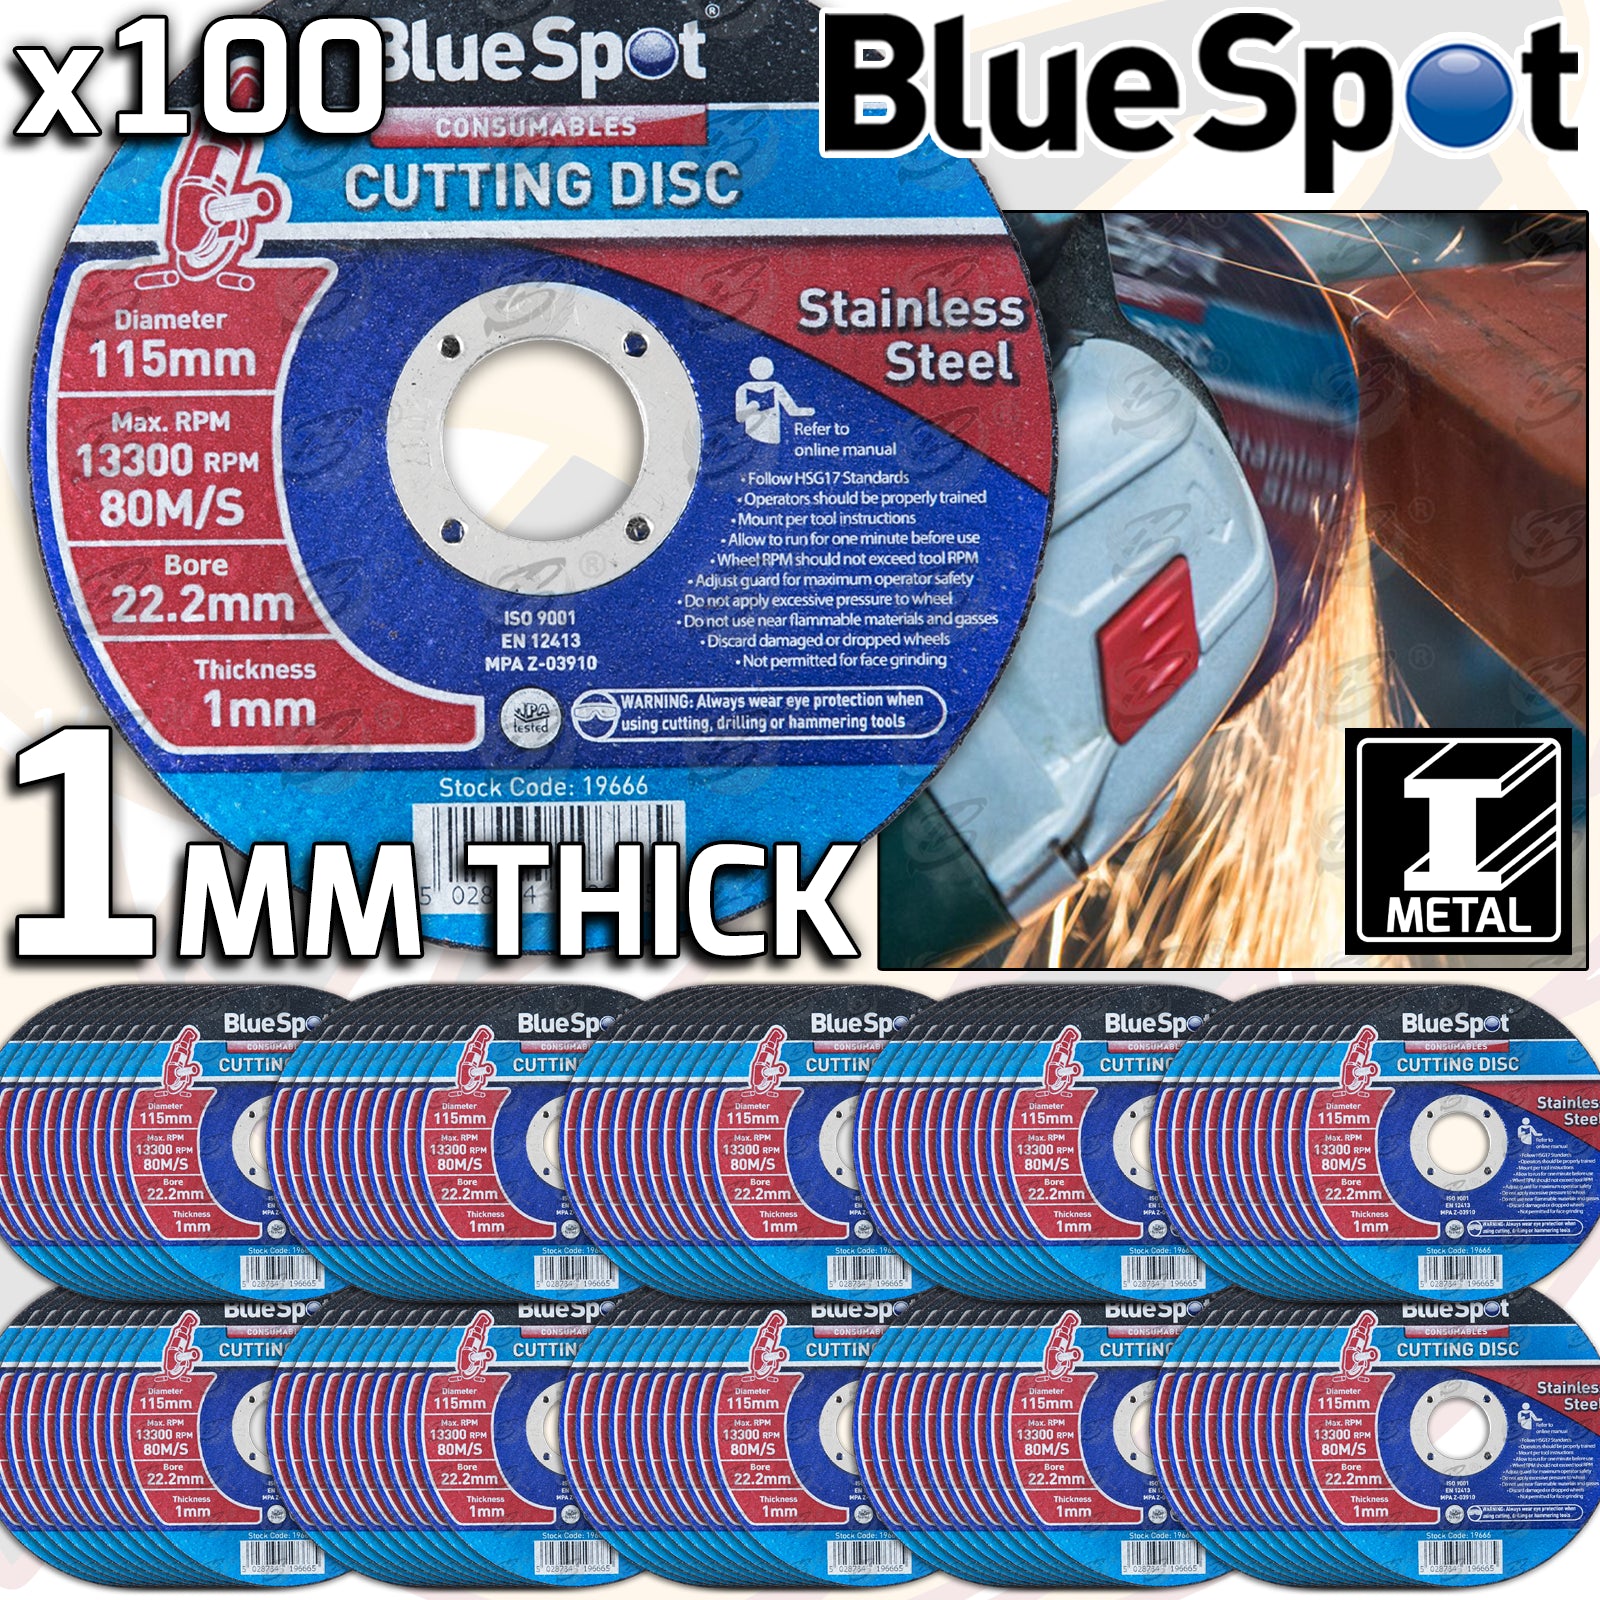 BLUESPOT 1MM THICK STAINLESS STEEL CUTTING DISCS ( X 100 DISCS )